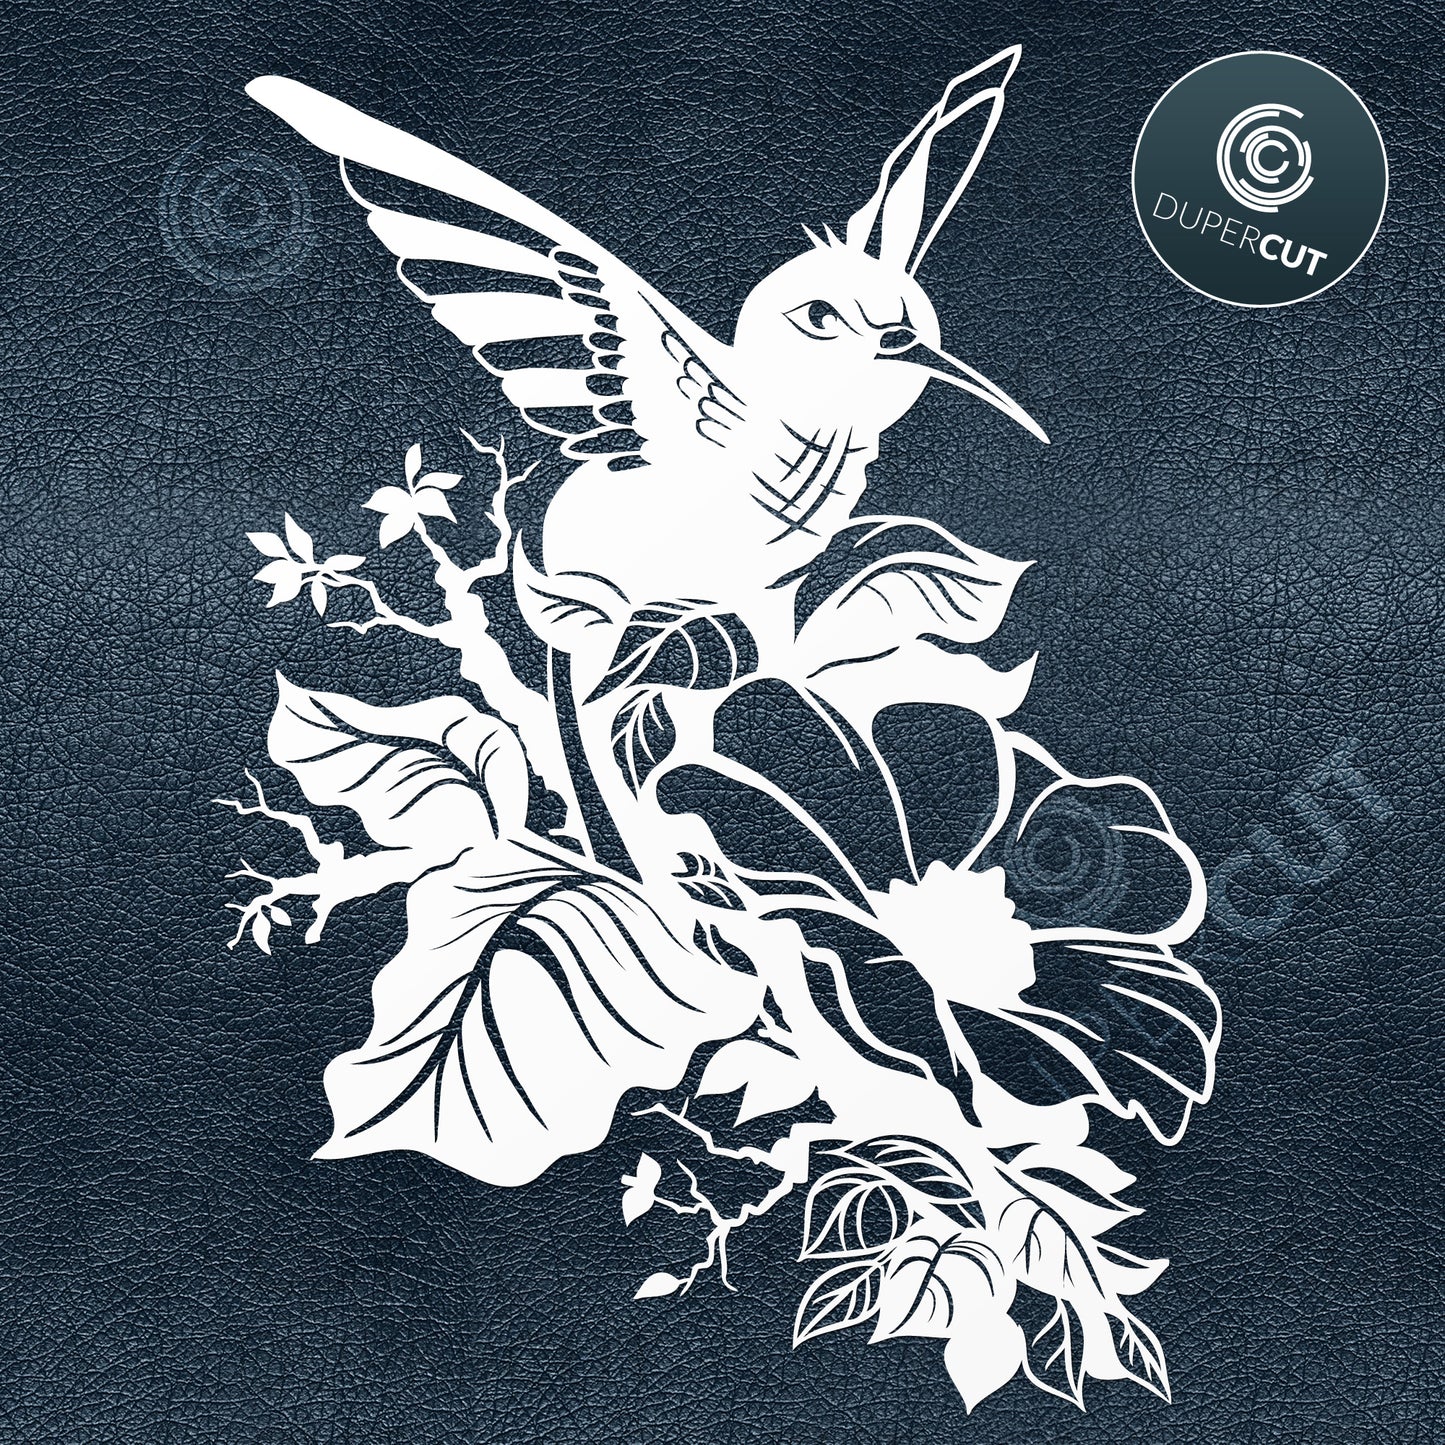 Hummingbird black drawing illustration. Papercutting template for commercial use. SVG files for Silhouette Cameo, Cricut, Glowforge, DXF for CNC, laser cutting, print on demand